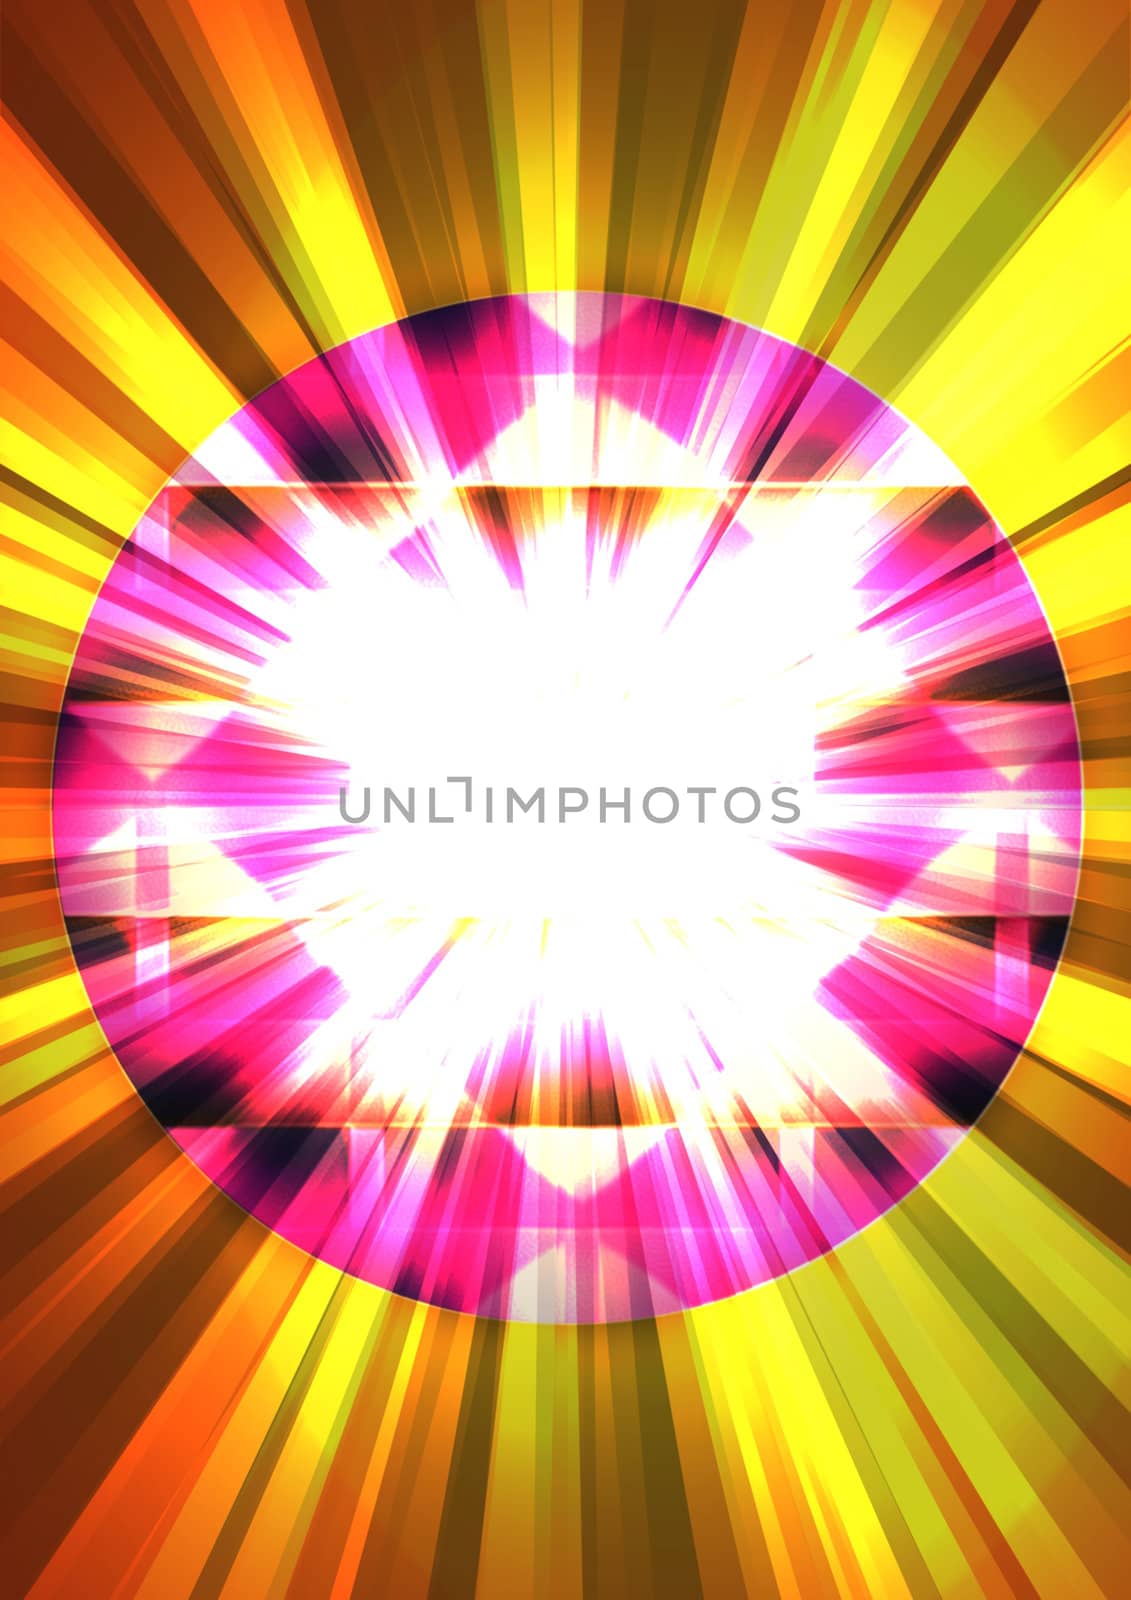 abstract image of the bright creative background, with light and the prism effect